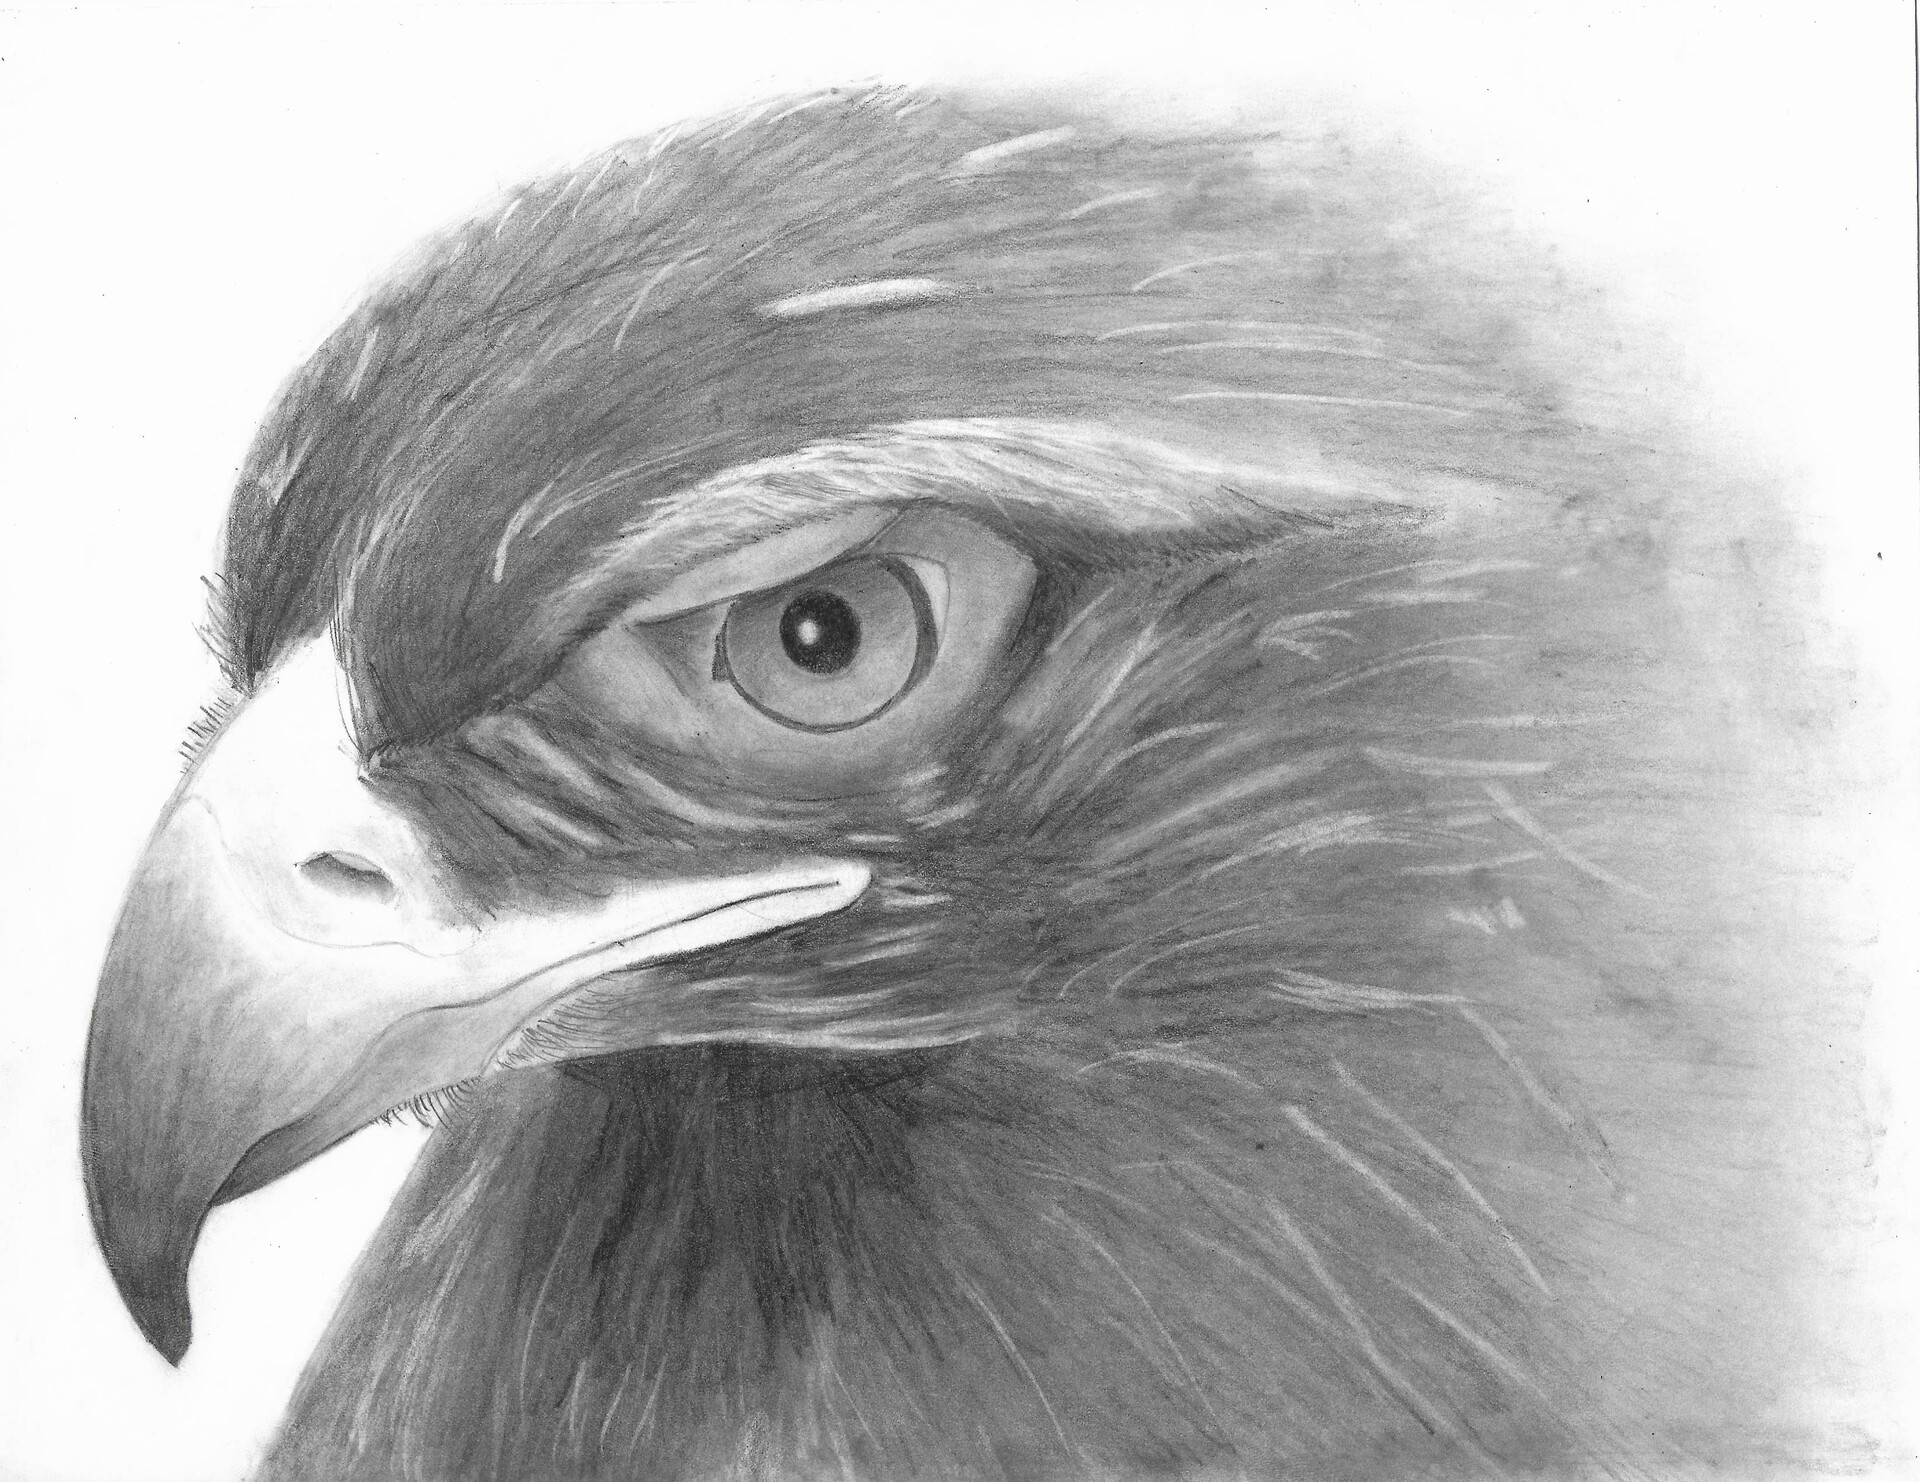 Bald eagle head draw and paint on white background vector illustration.  posters for the wall • posters monochrome, white background, eagle |  myloview.com